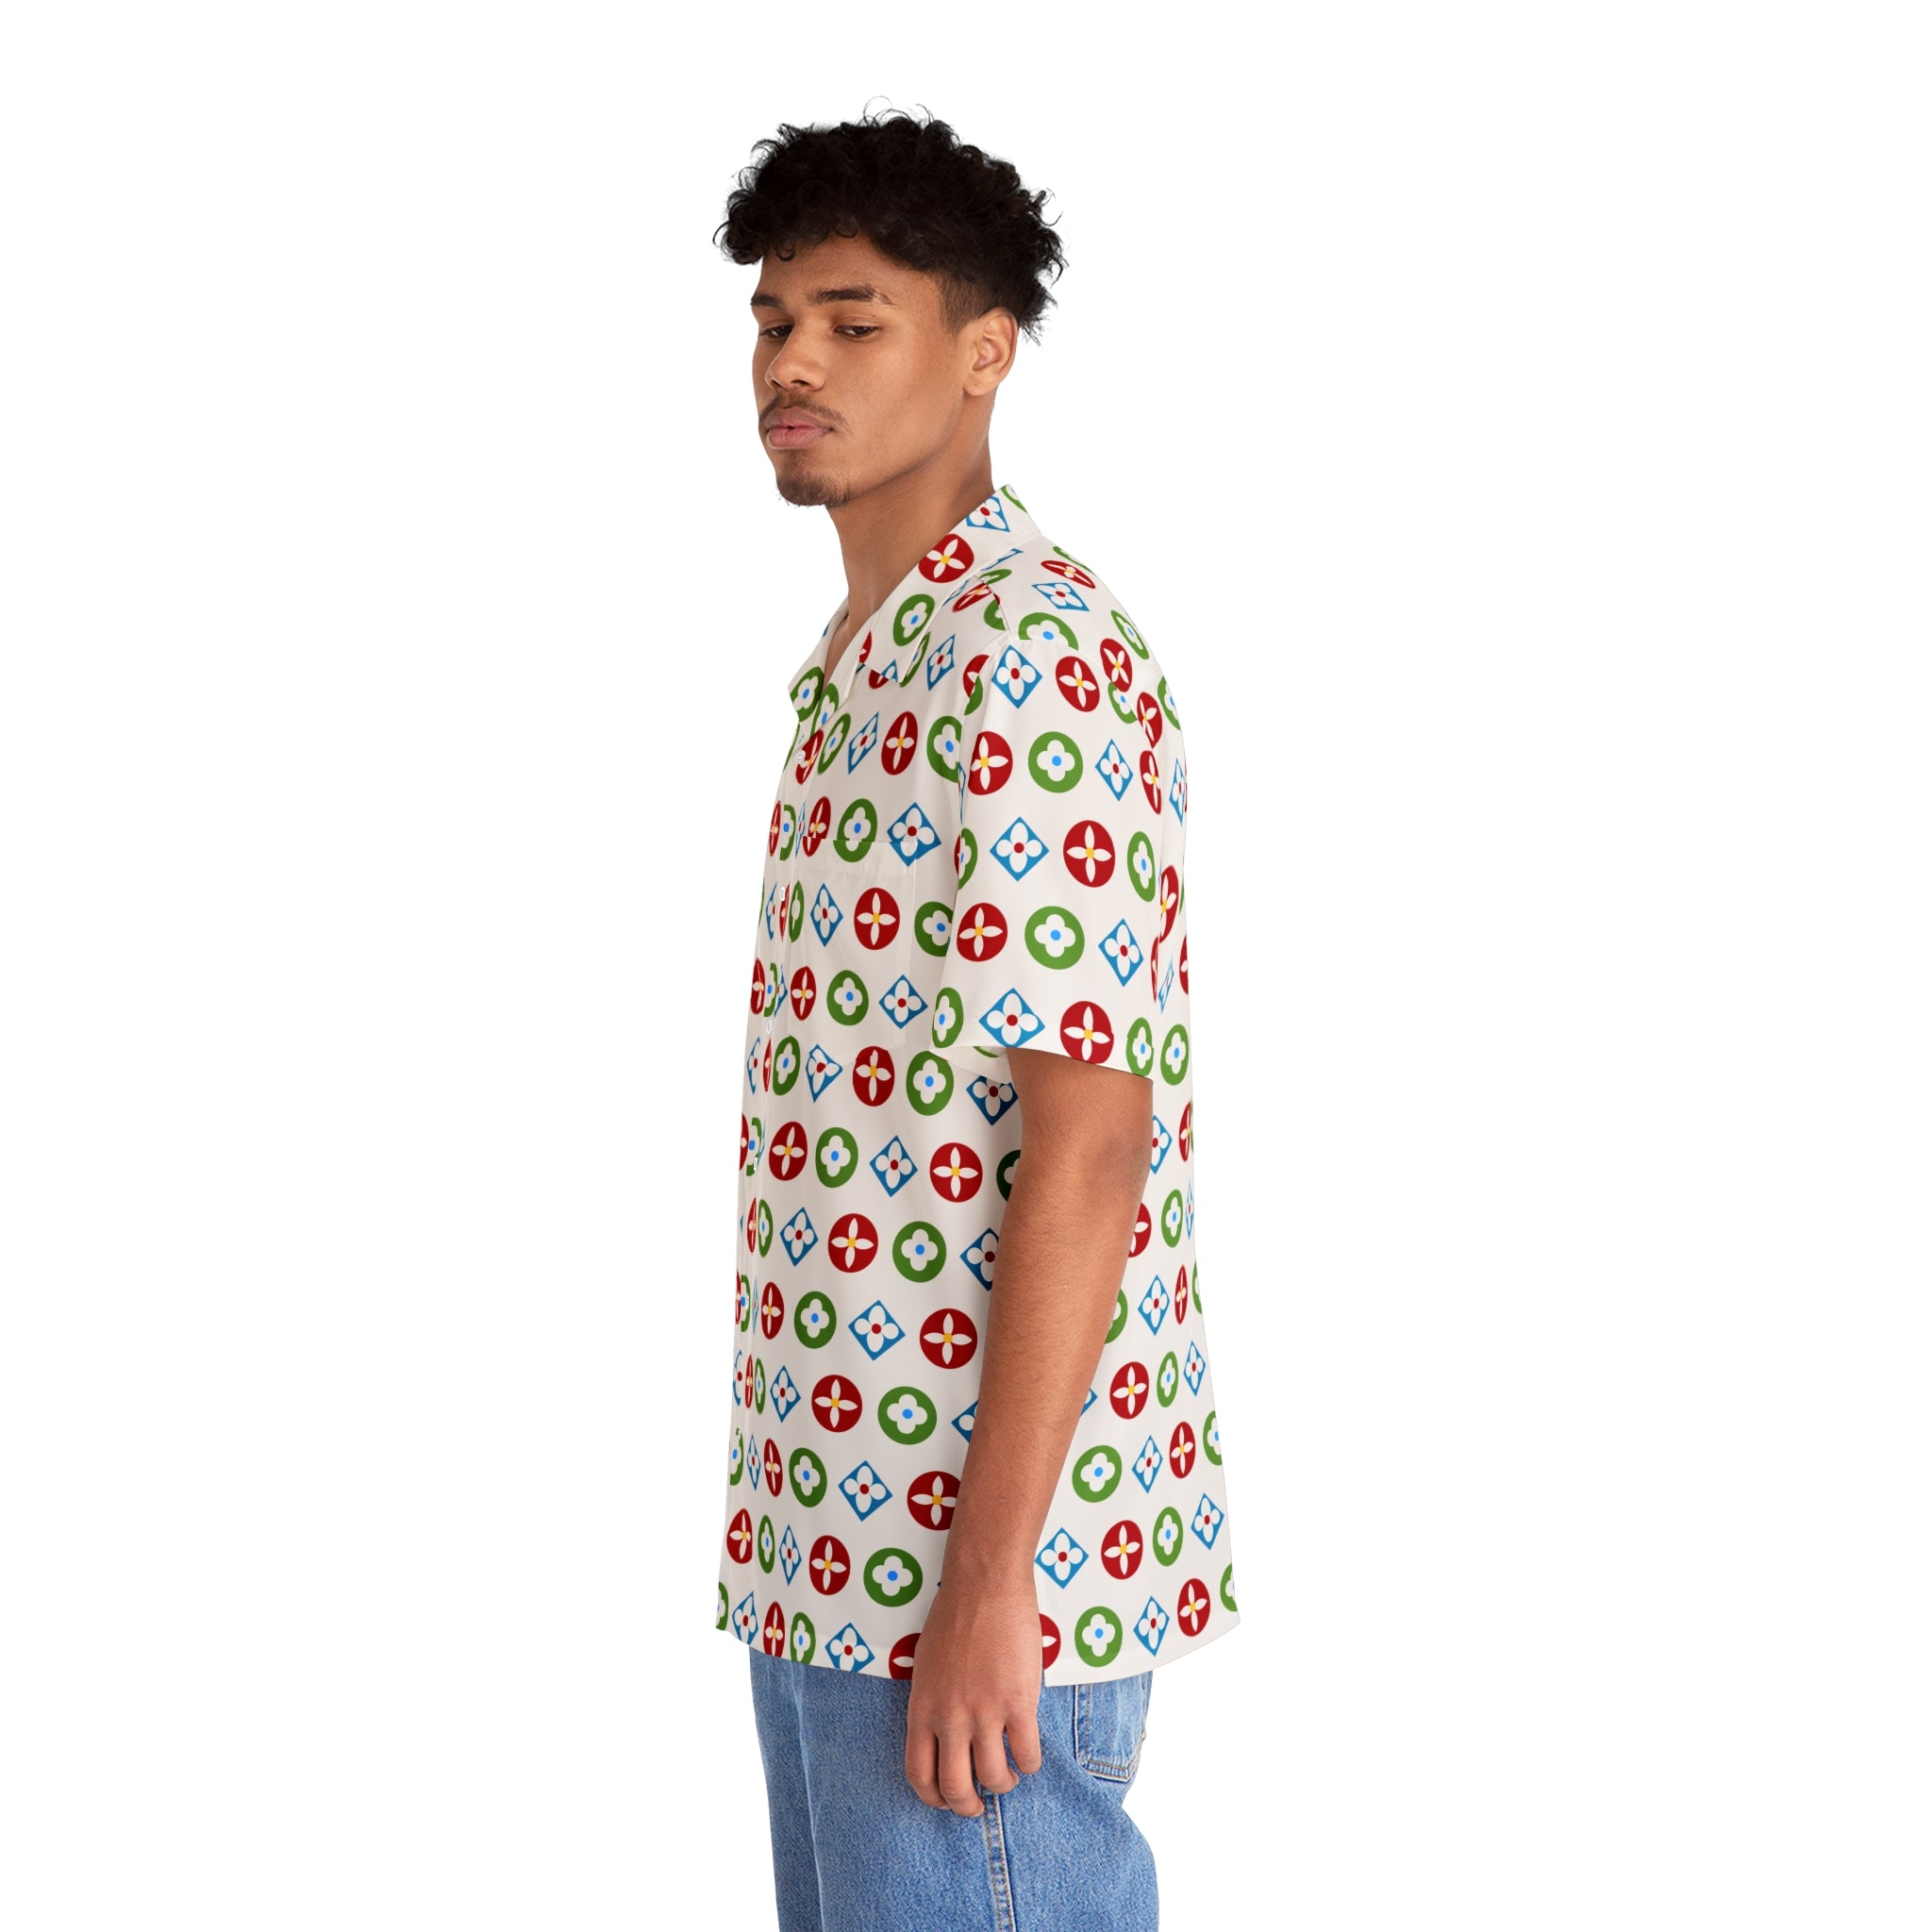 Groove Collection Trilogy of Icons Pattern (Red, Green, Blue) White Unisex Gender Neutral Button Up Shirt, Hawaiian Shirt